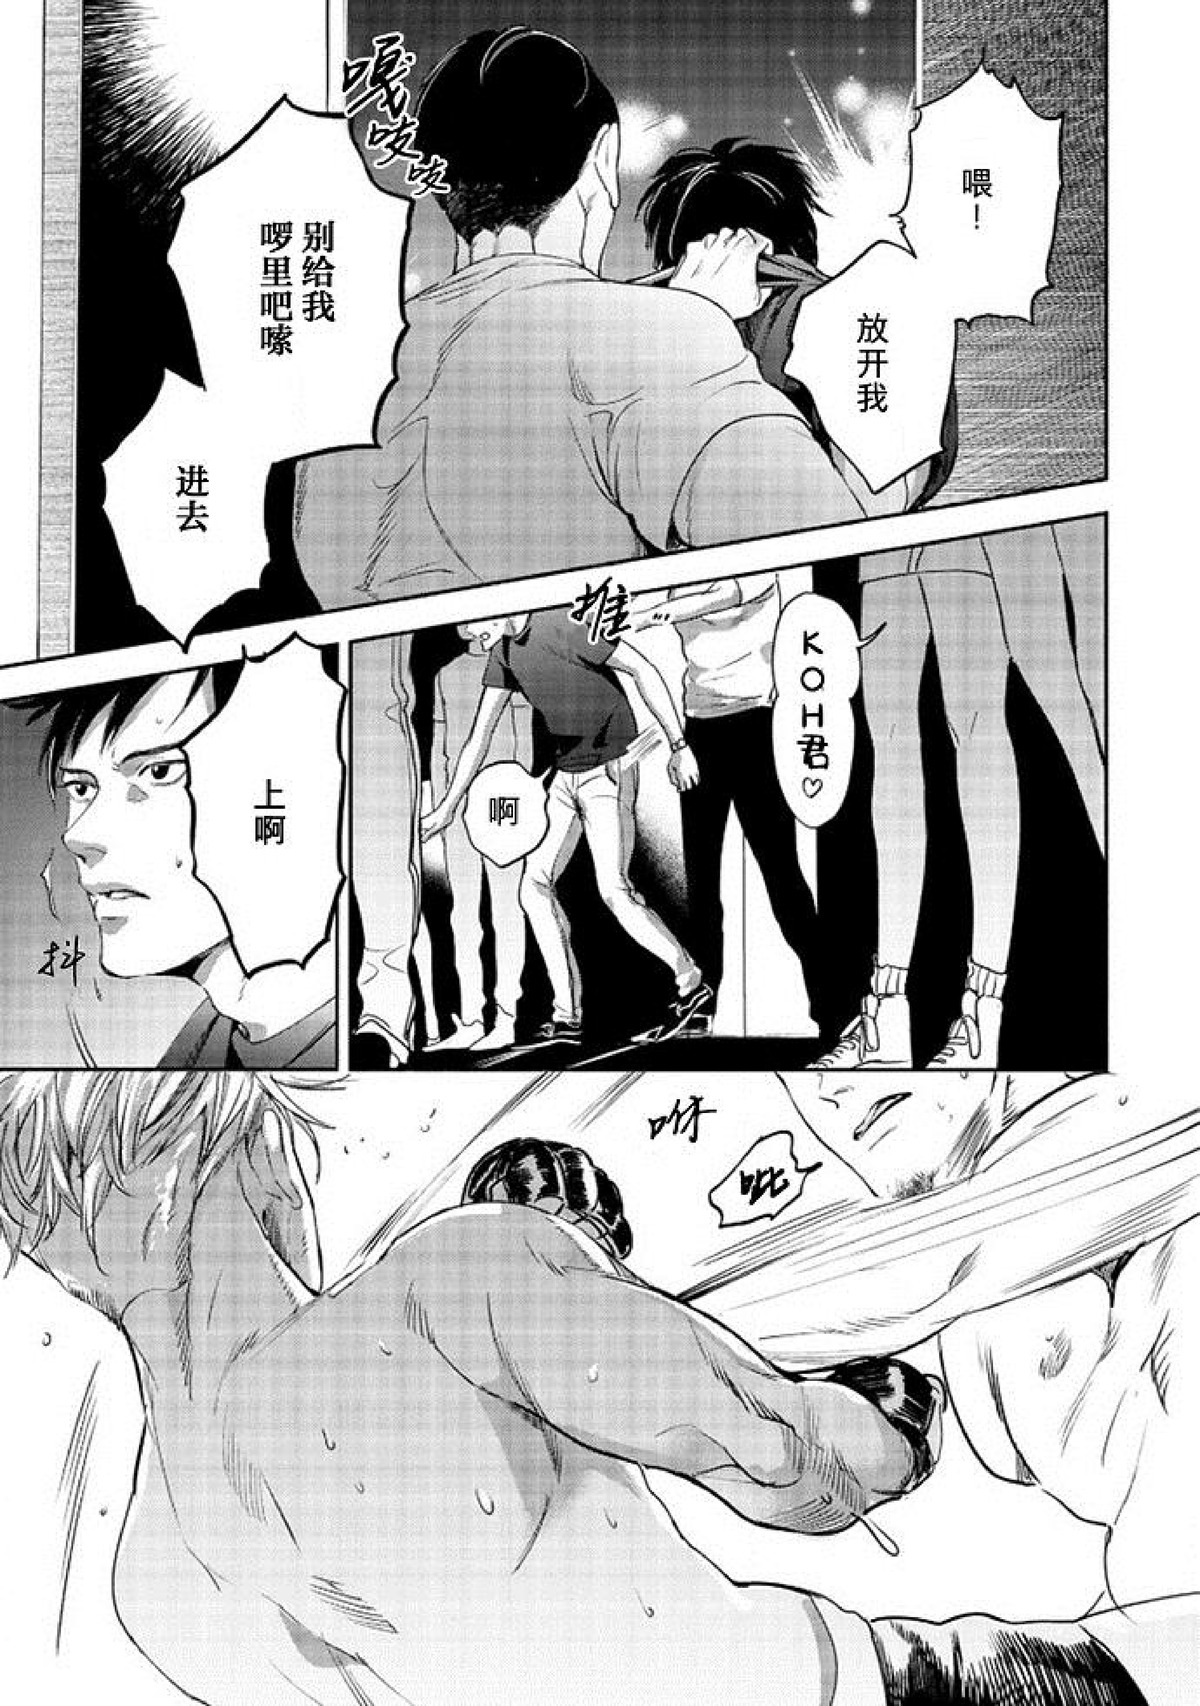 【Two sides of the same coin[腐漫]】漫画-（上卷01-02）章节漫画下拉式图片-53.jpg